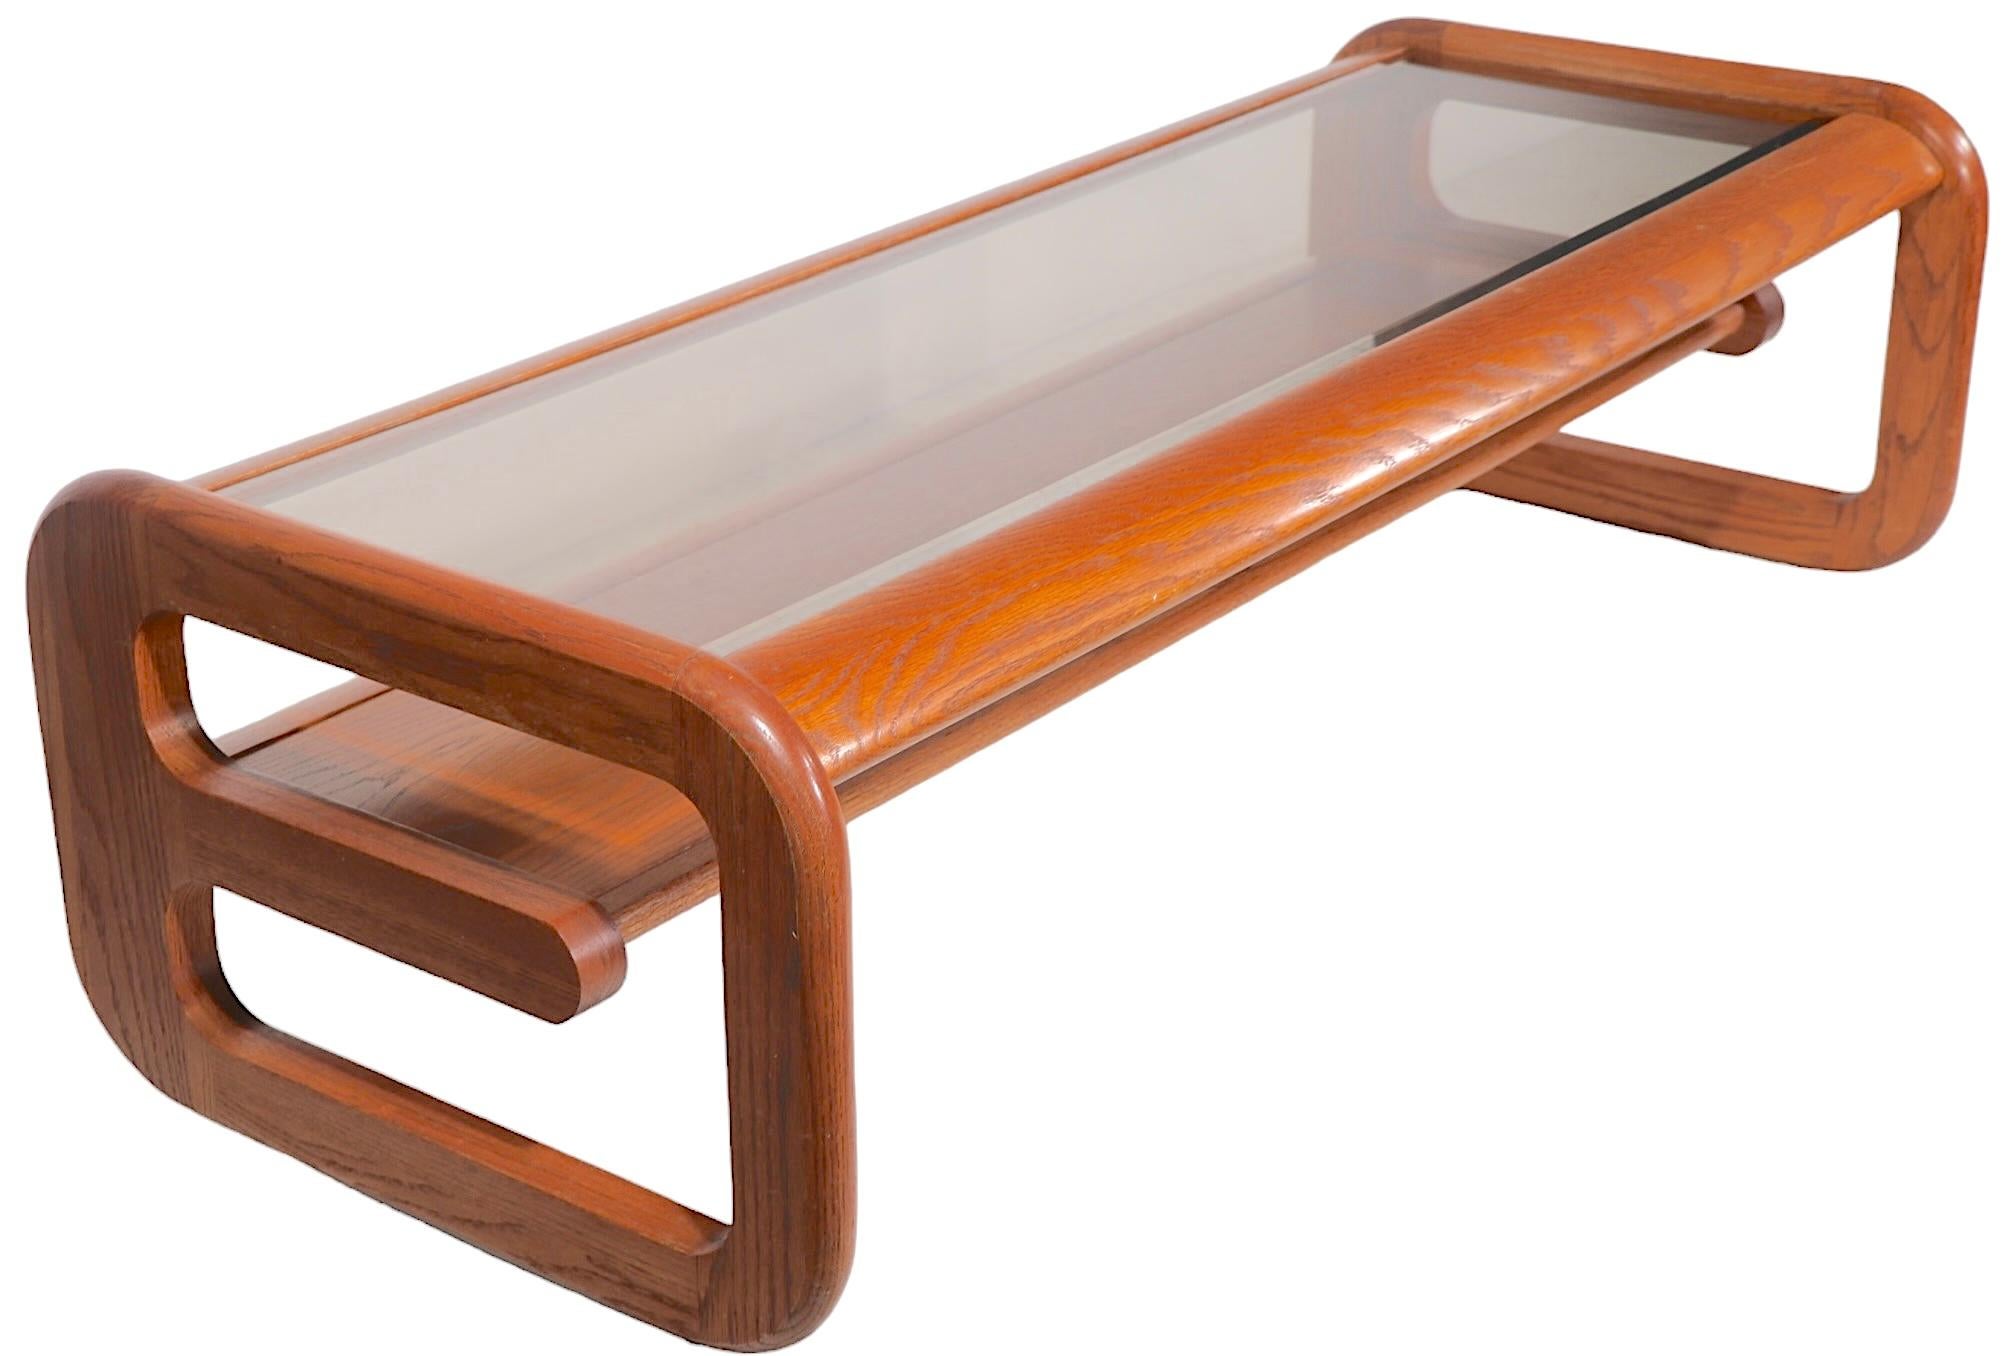  Post Modern Oak and Glass Coffee Table by Lou Hodges for Mersman  c. 1970's For Sale 5